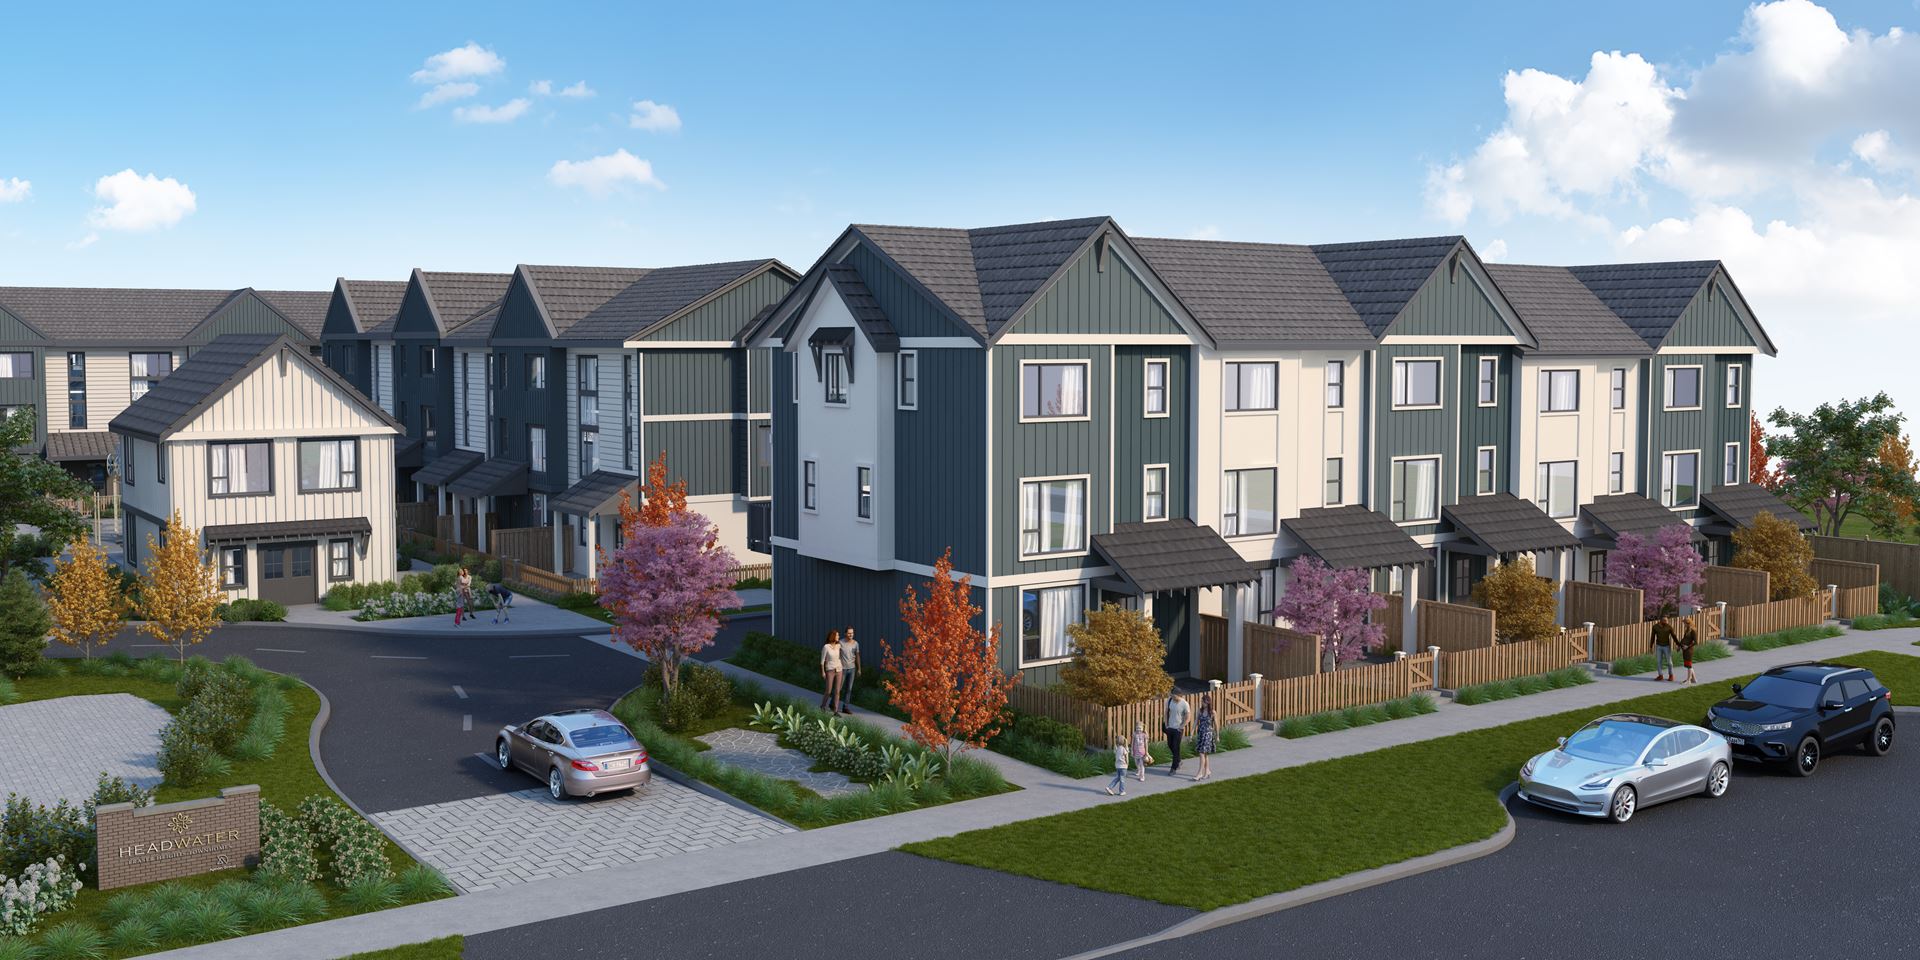 Headwater Fraser Heights Townhomes by Apcon – Availability, Prices, Plans